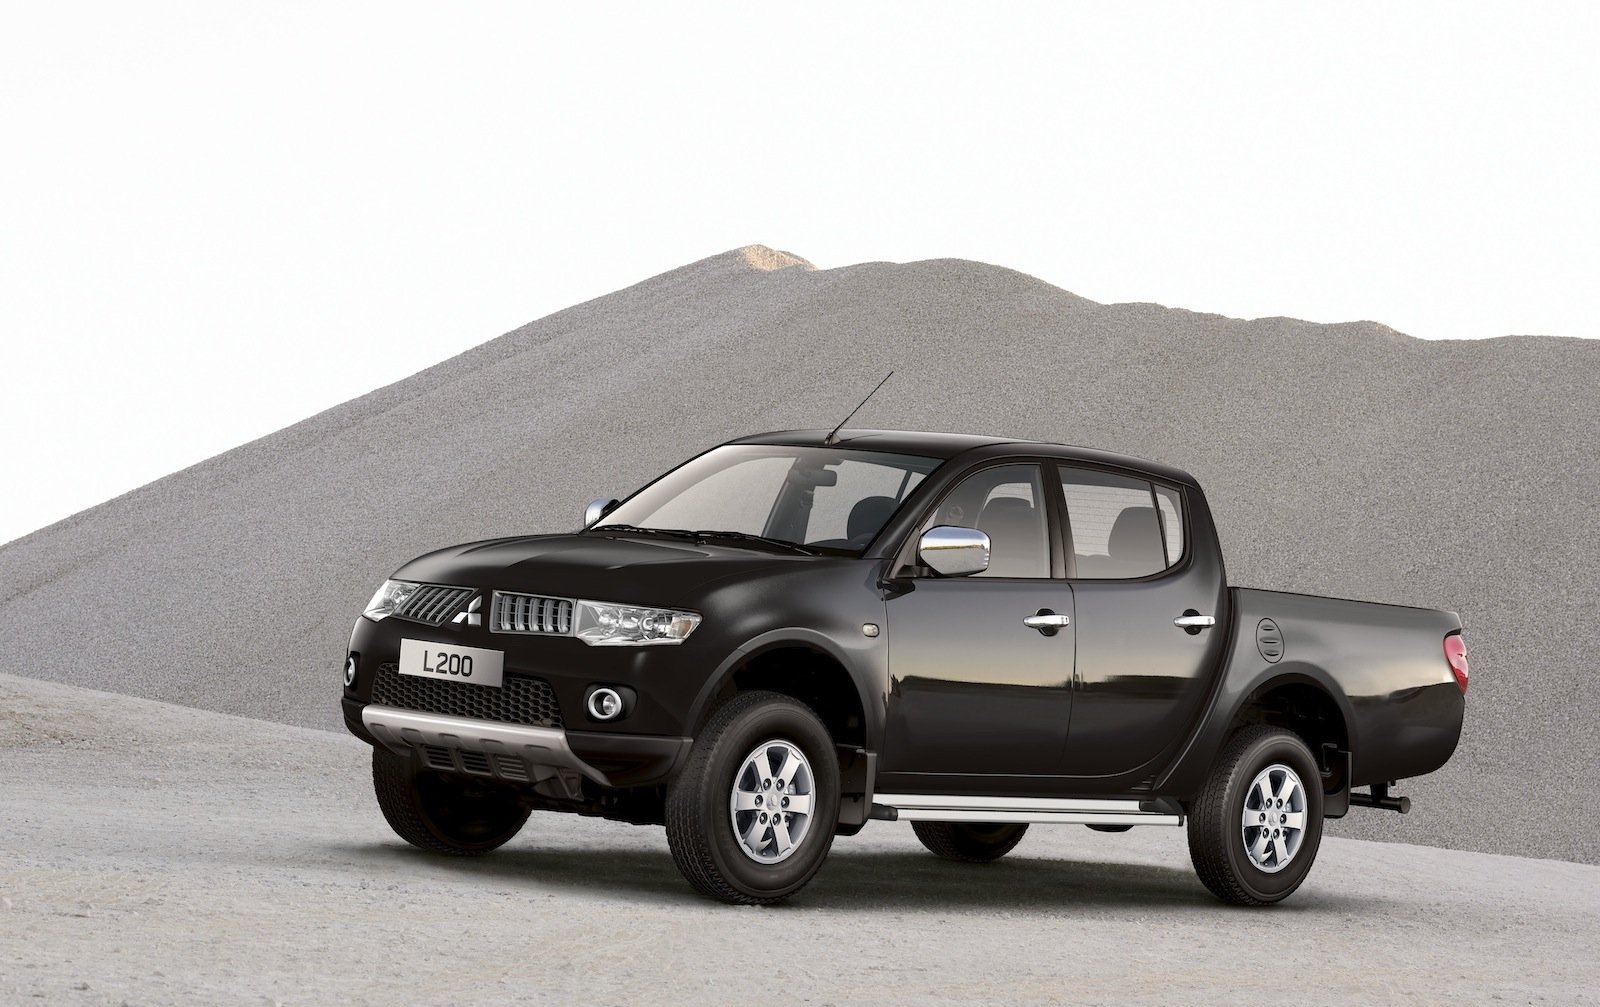 Mitsubishi L200 2010 Review, Amazing Pictures and Images